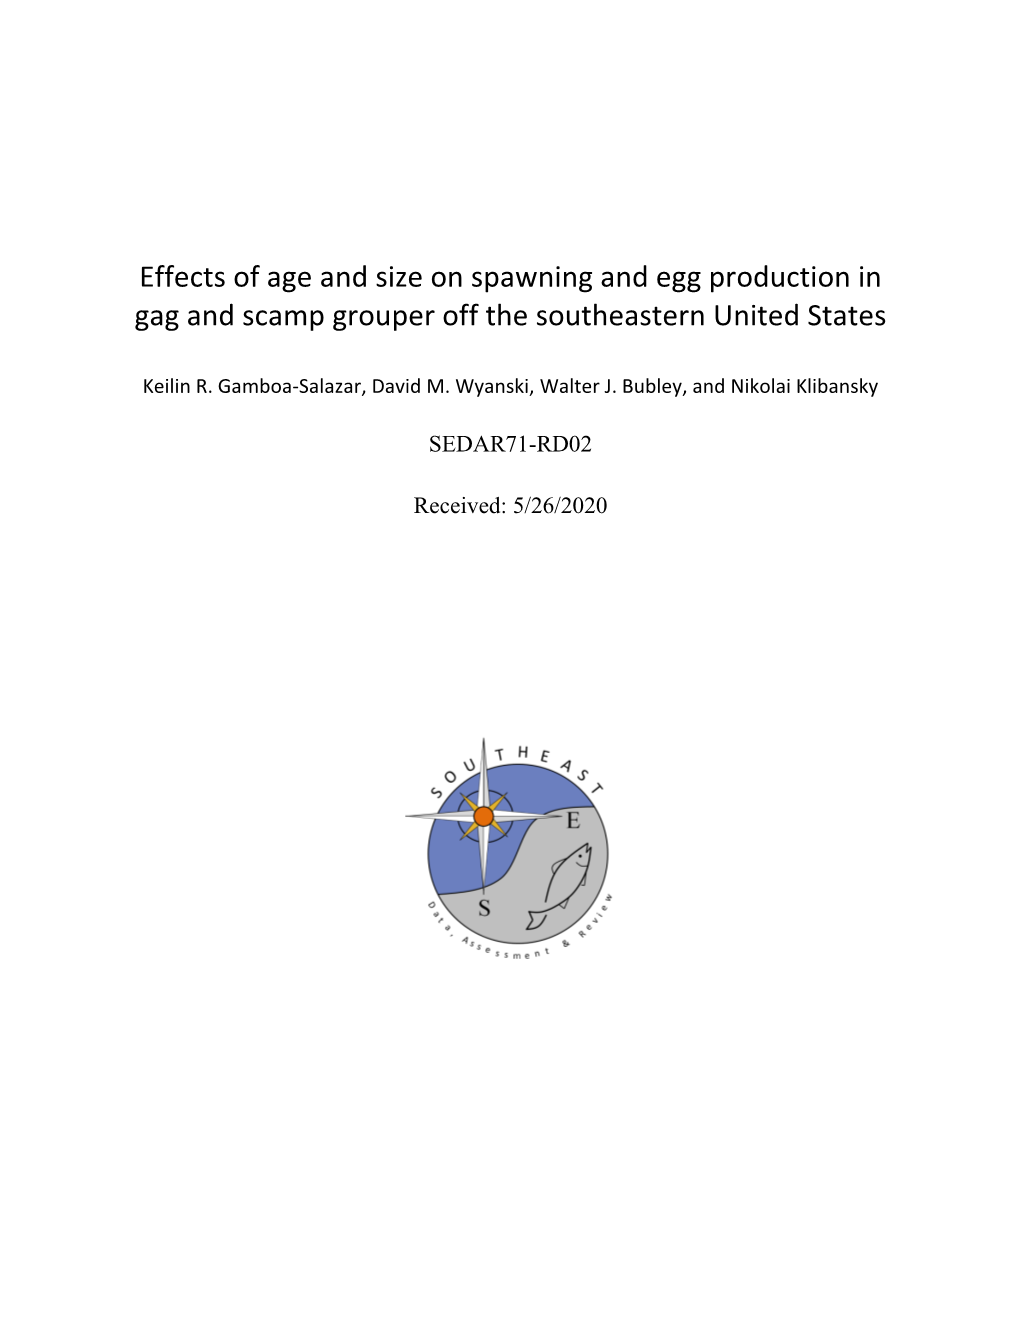 Effects of Age and Size on Spawning and Egg Production in Gag and Scamp Grouper Off the Southeastern United States